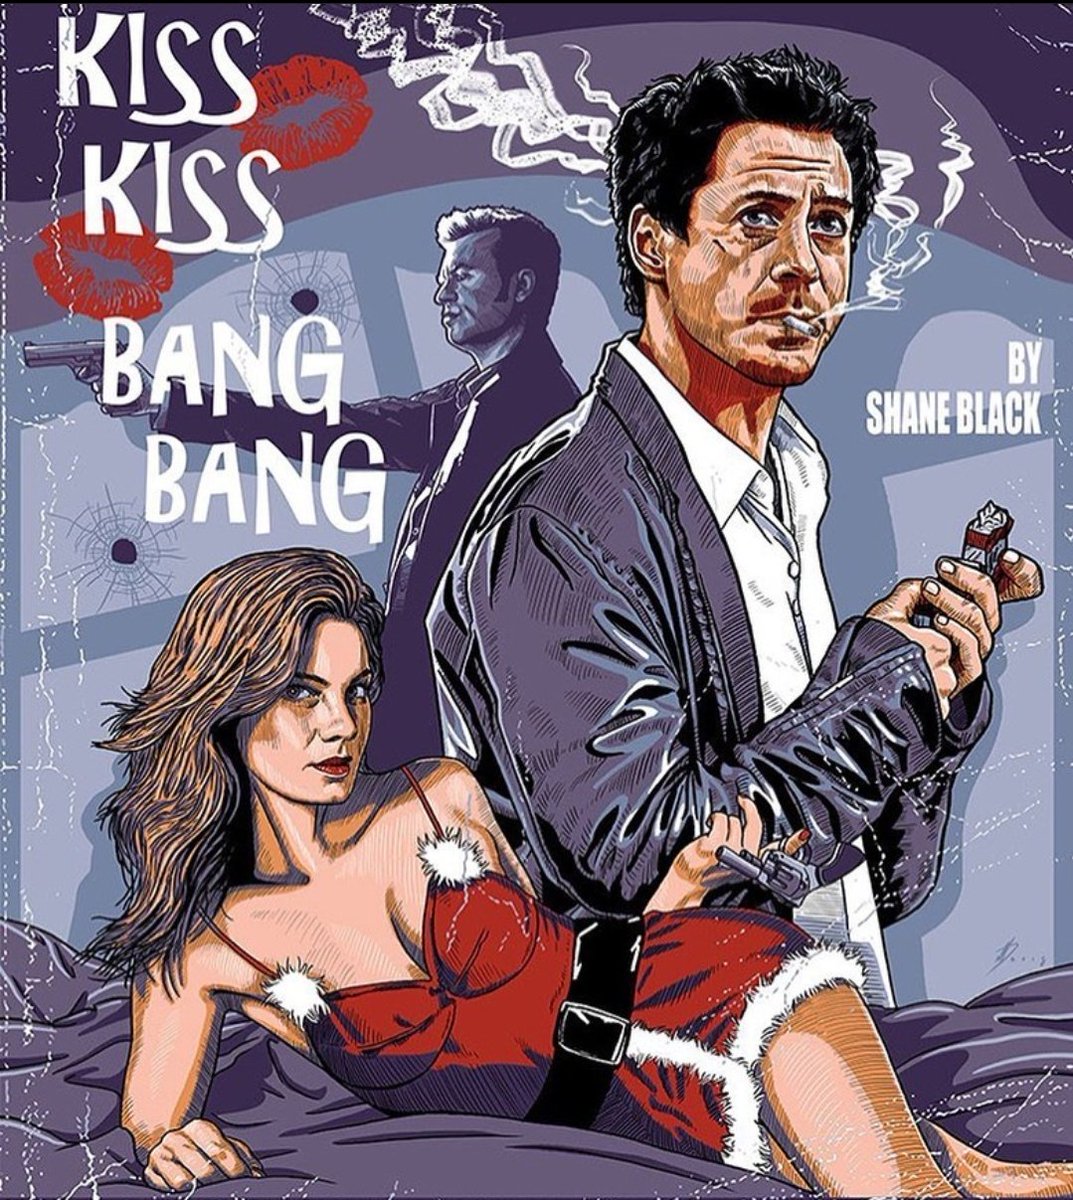 Dropping next Monday Dec 5th J the
first of our Christmas episodes KISS KISS BANG BANG
hosted by Stew #podcastandchill #podcasts
#whitebataudio #moviereview #beer #drunkpodcast
#moviefacts #classic #art #subscribe #horror
#liqour #podcastlovers #comedy #scifi #TheDEN #drinkreview